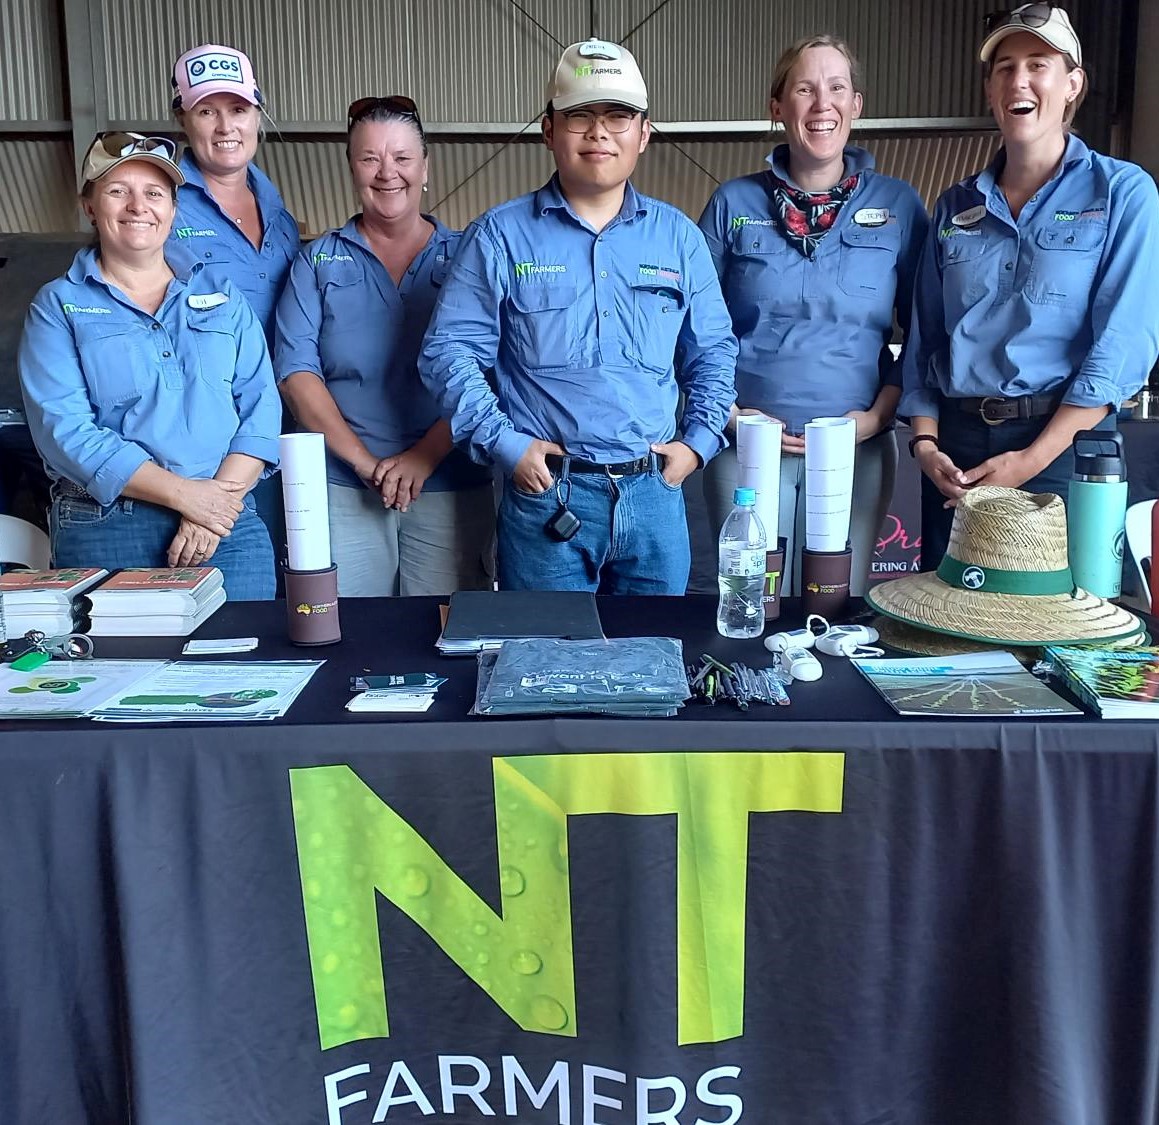 Last week's soil and irrigation field day in Katherine, NT was a huge success! Hats off to the hardworking team at @NTFarmers for organising such an informative event, and to the Australia Government's Future Drought Fund for providing funding support 🌱👍 #FutureDroughtFund